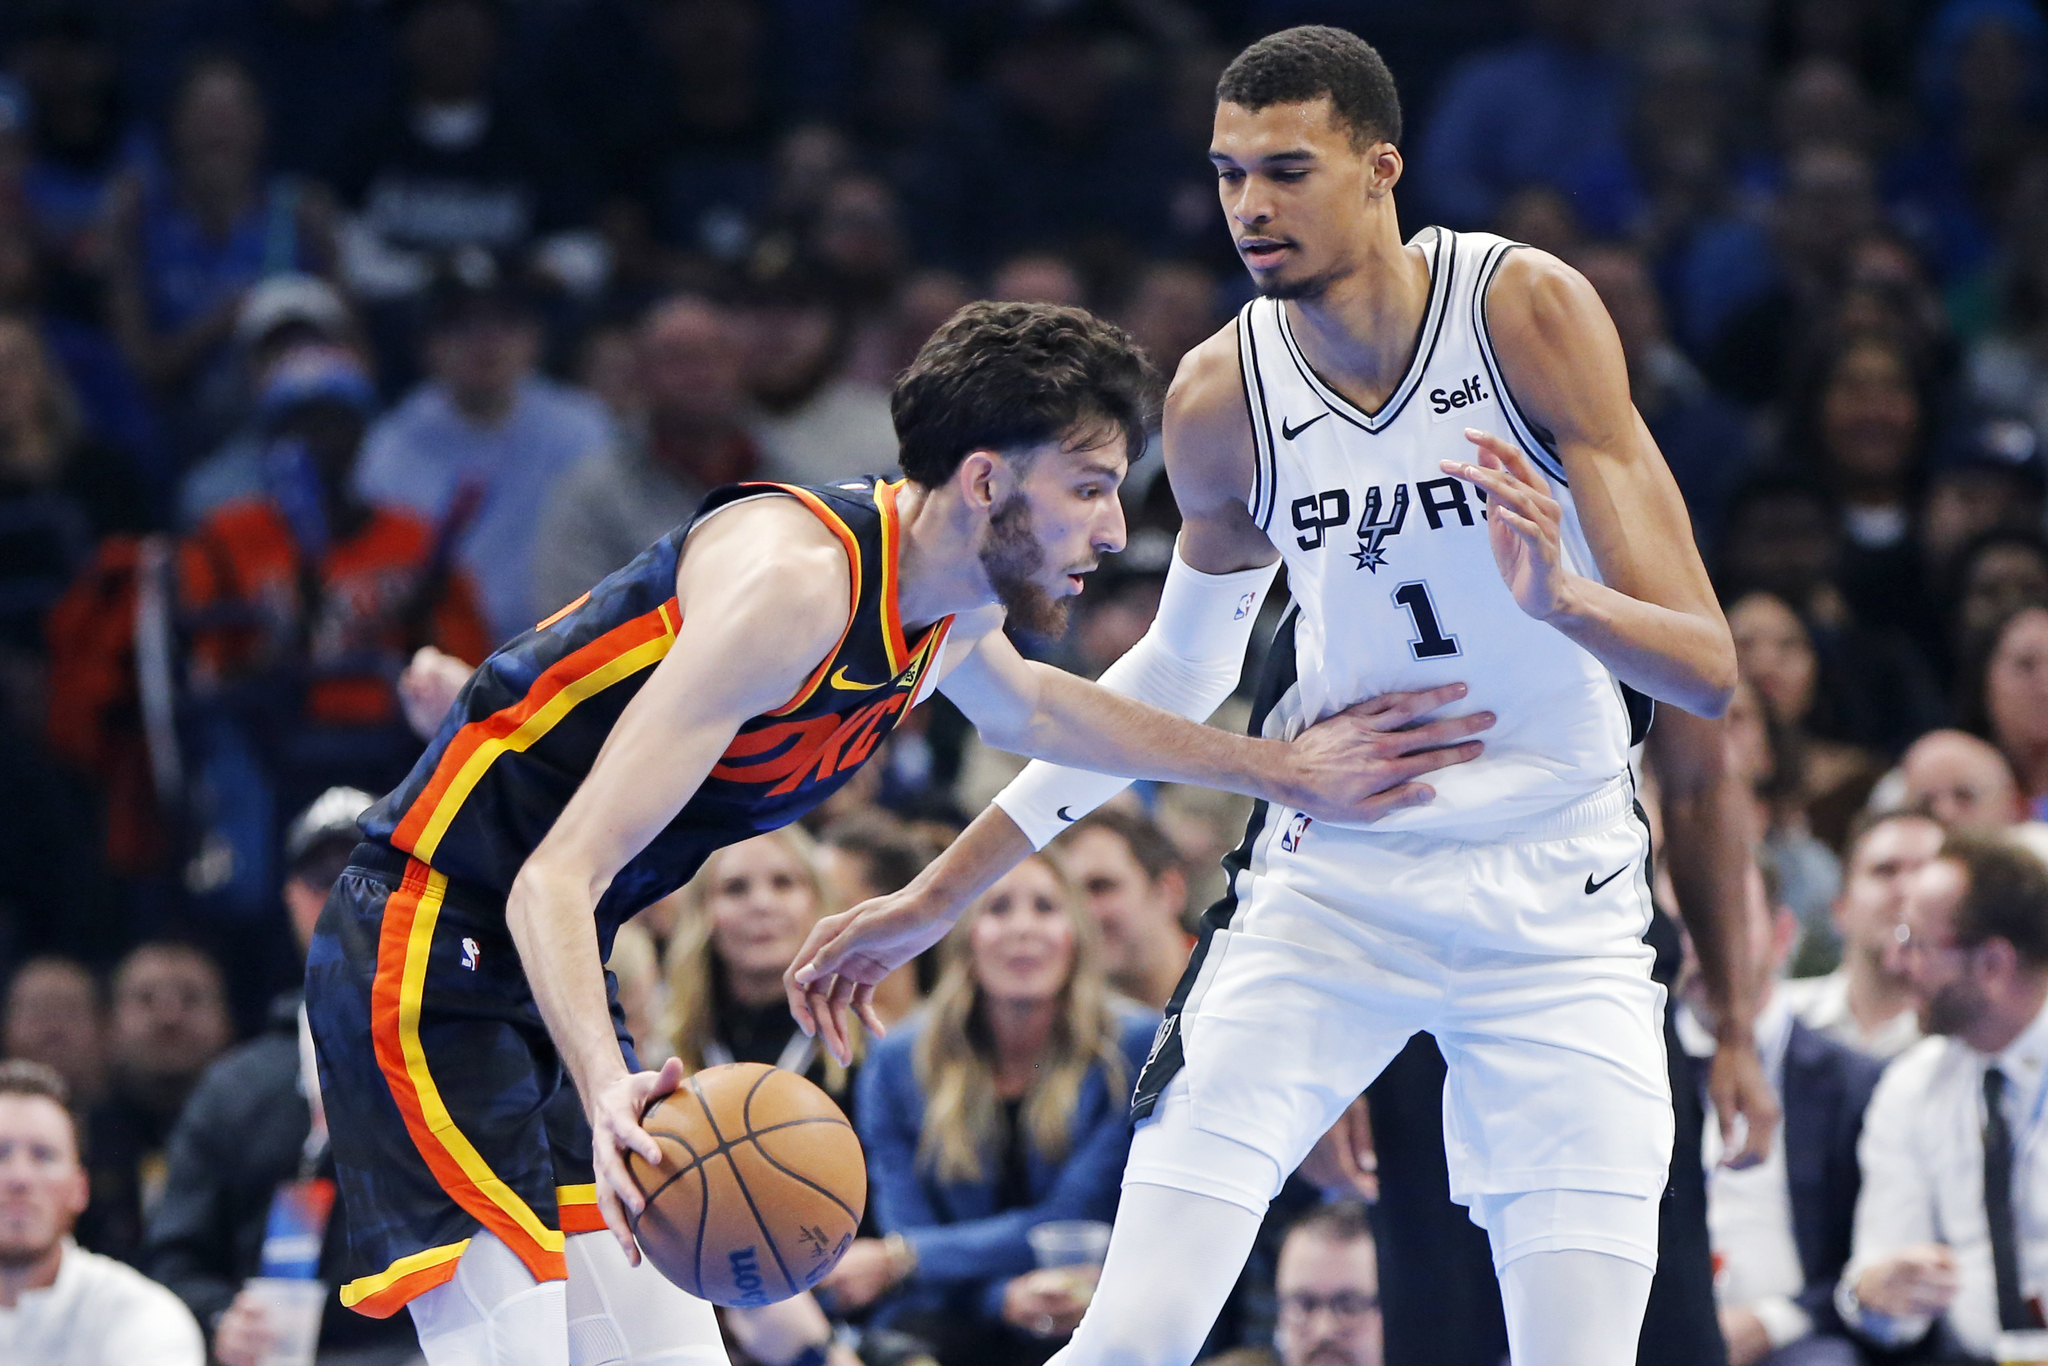 The Thunder's Chet Holmgren and Spurs' Victor Wembanyama faced off for the first time on Tuesday night.